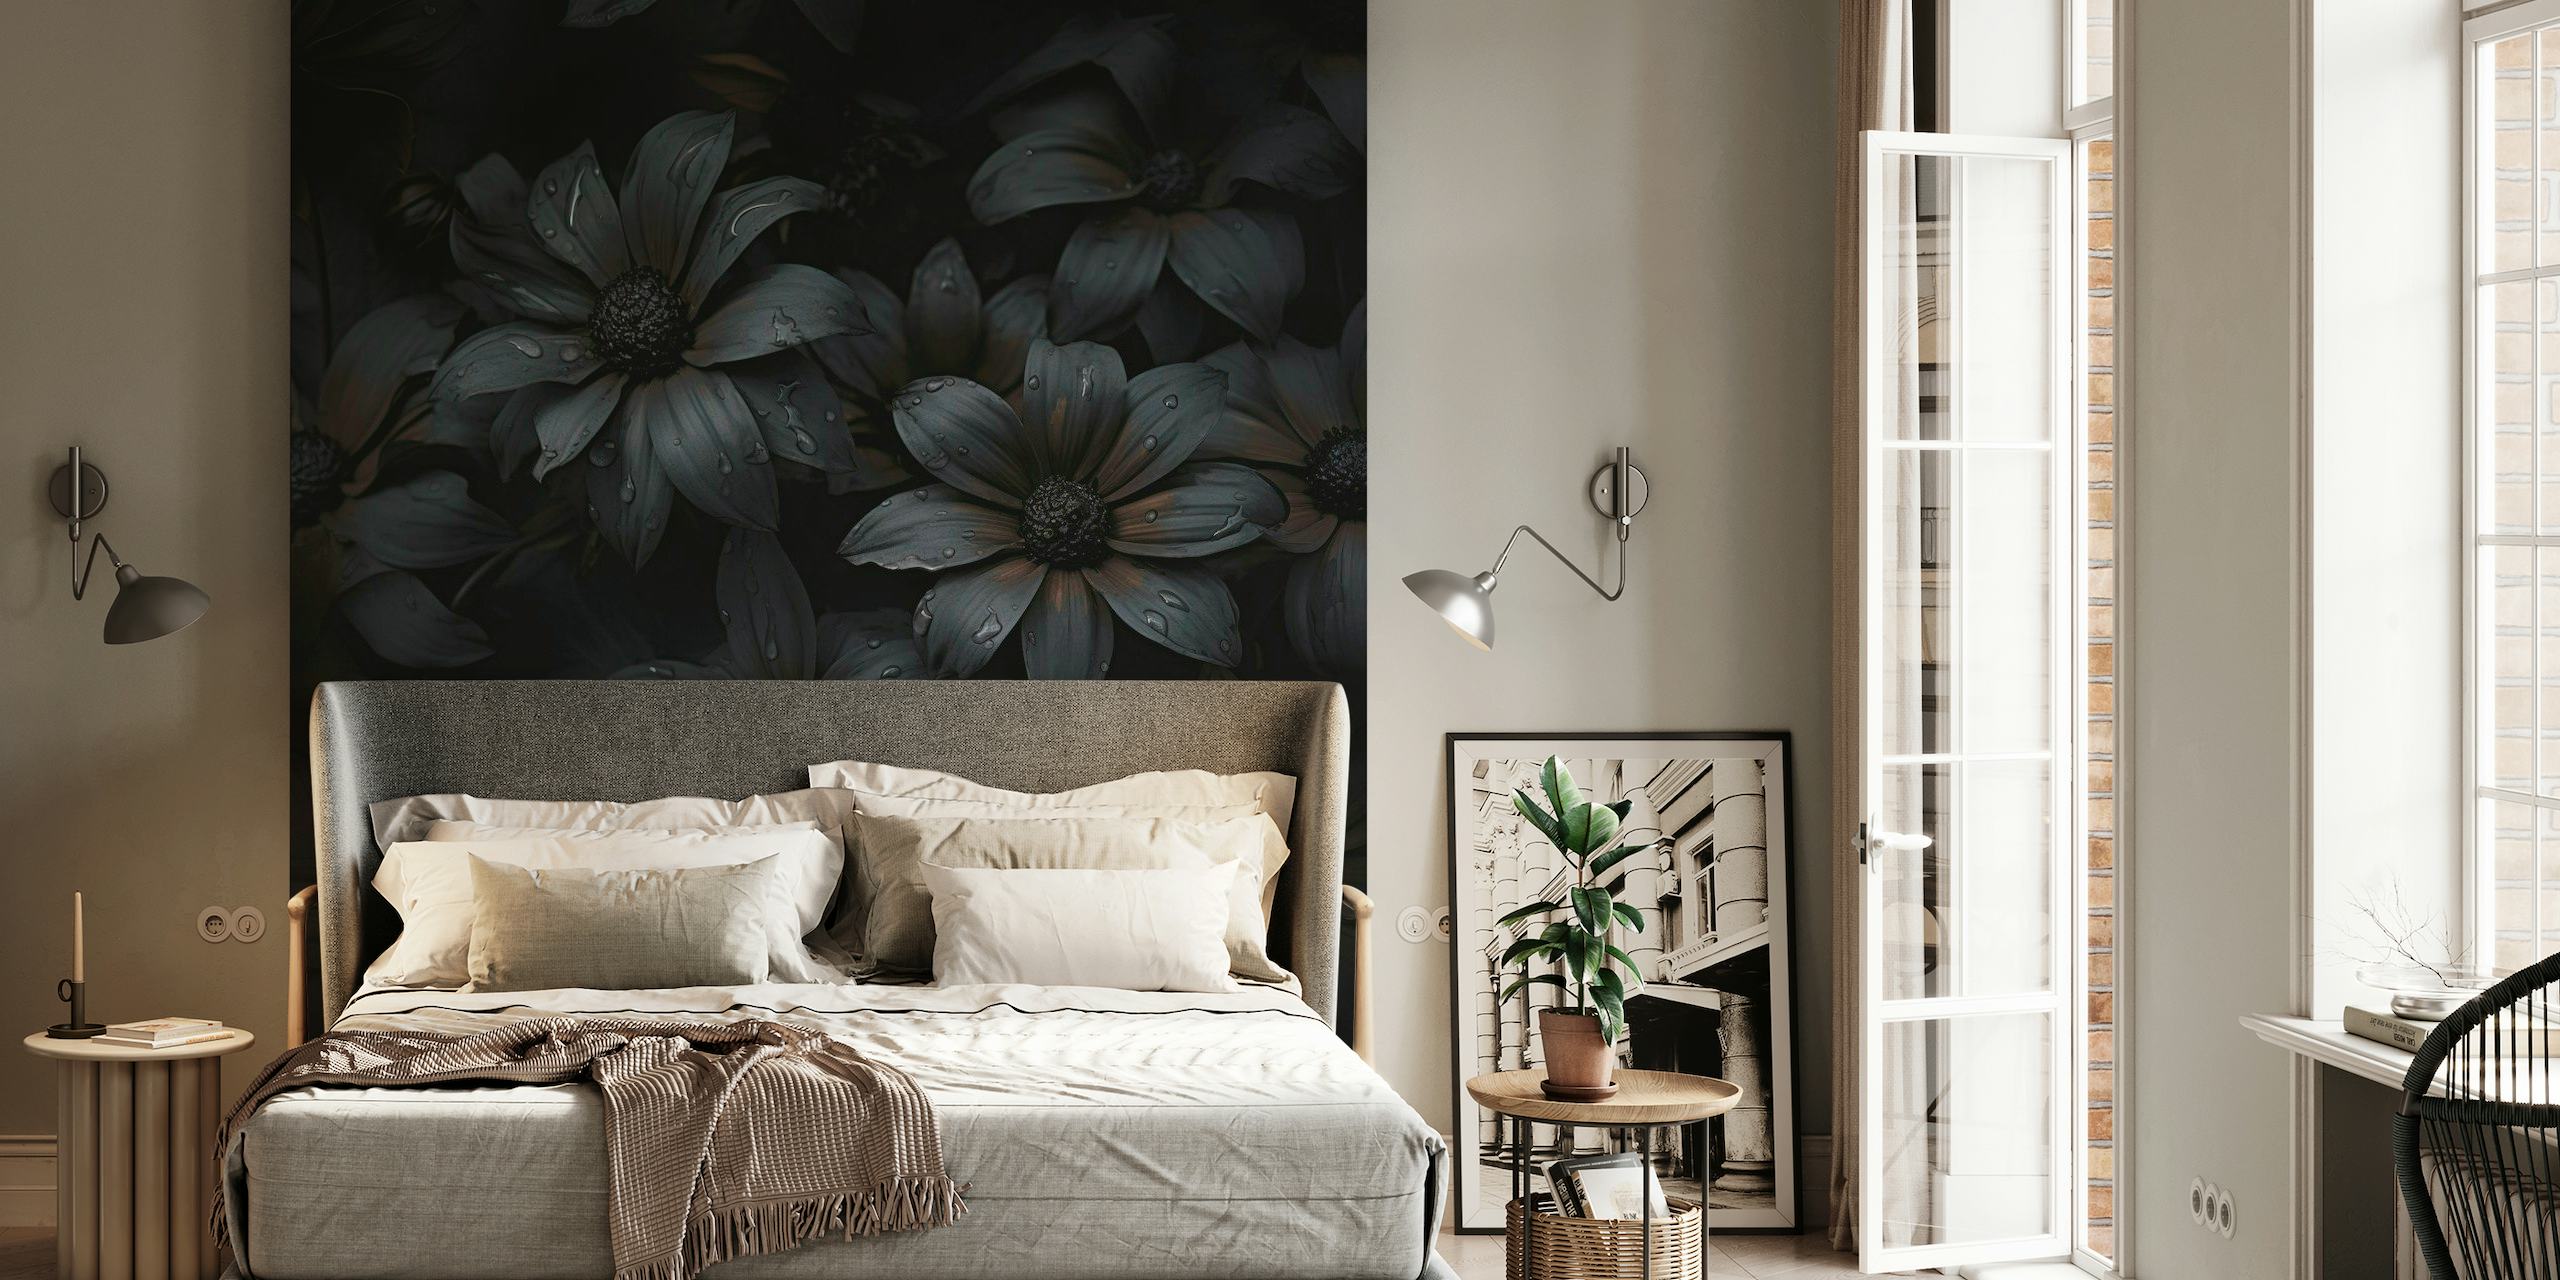 Dark floral wall mural with detailed flowers in opulent reverie style for interior decor